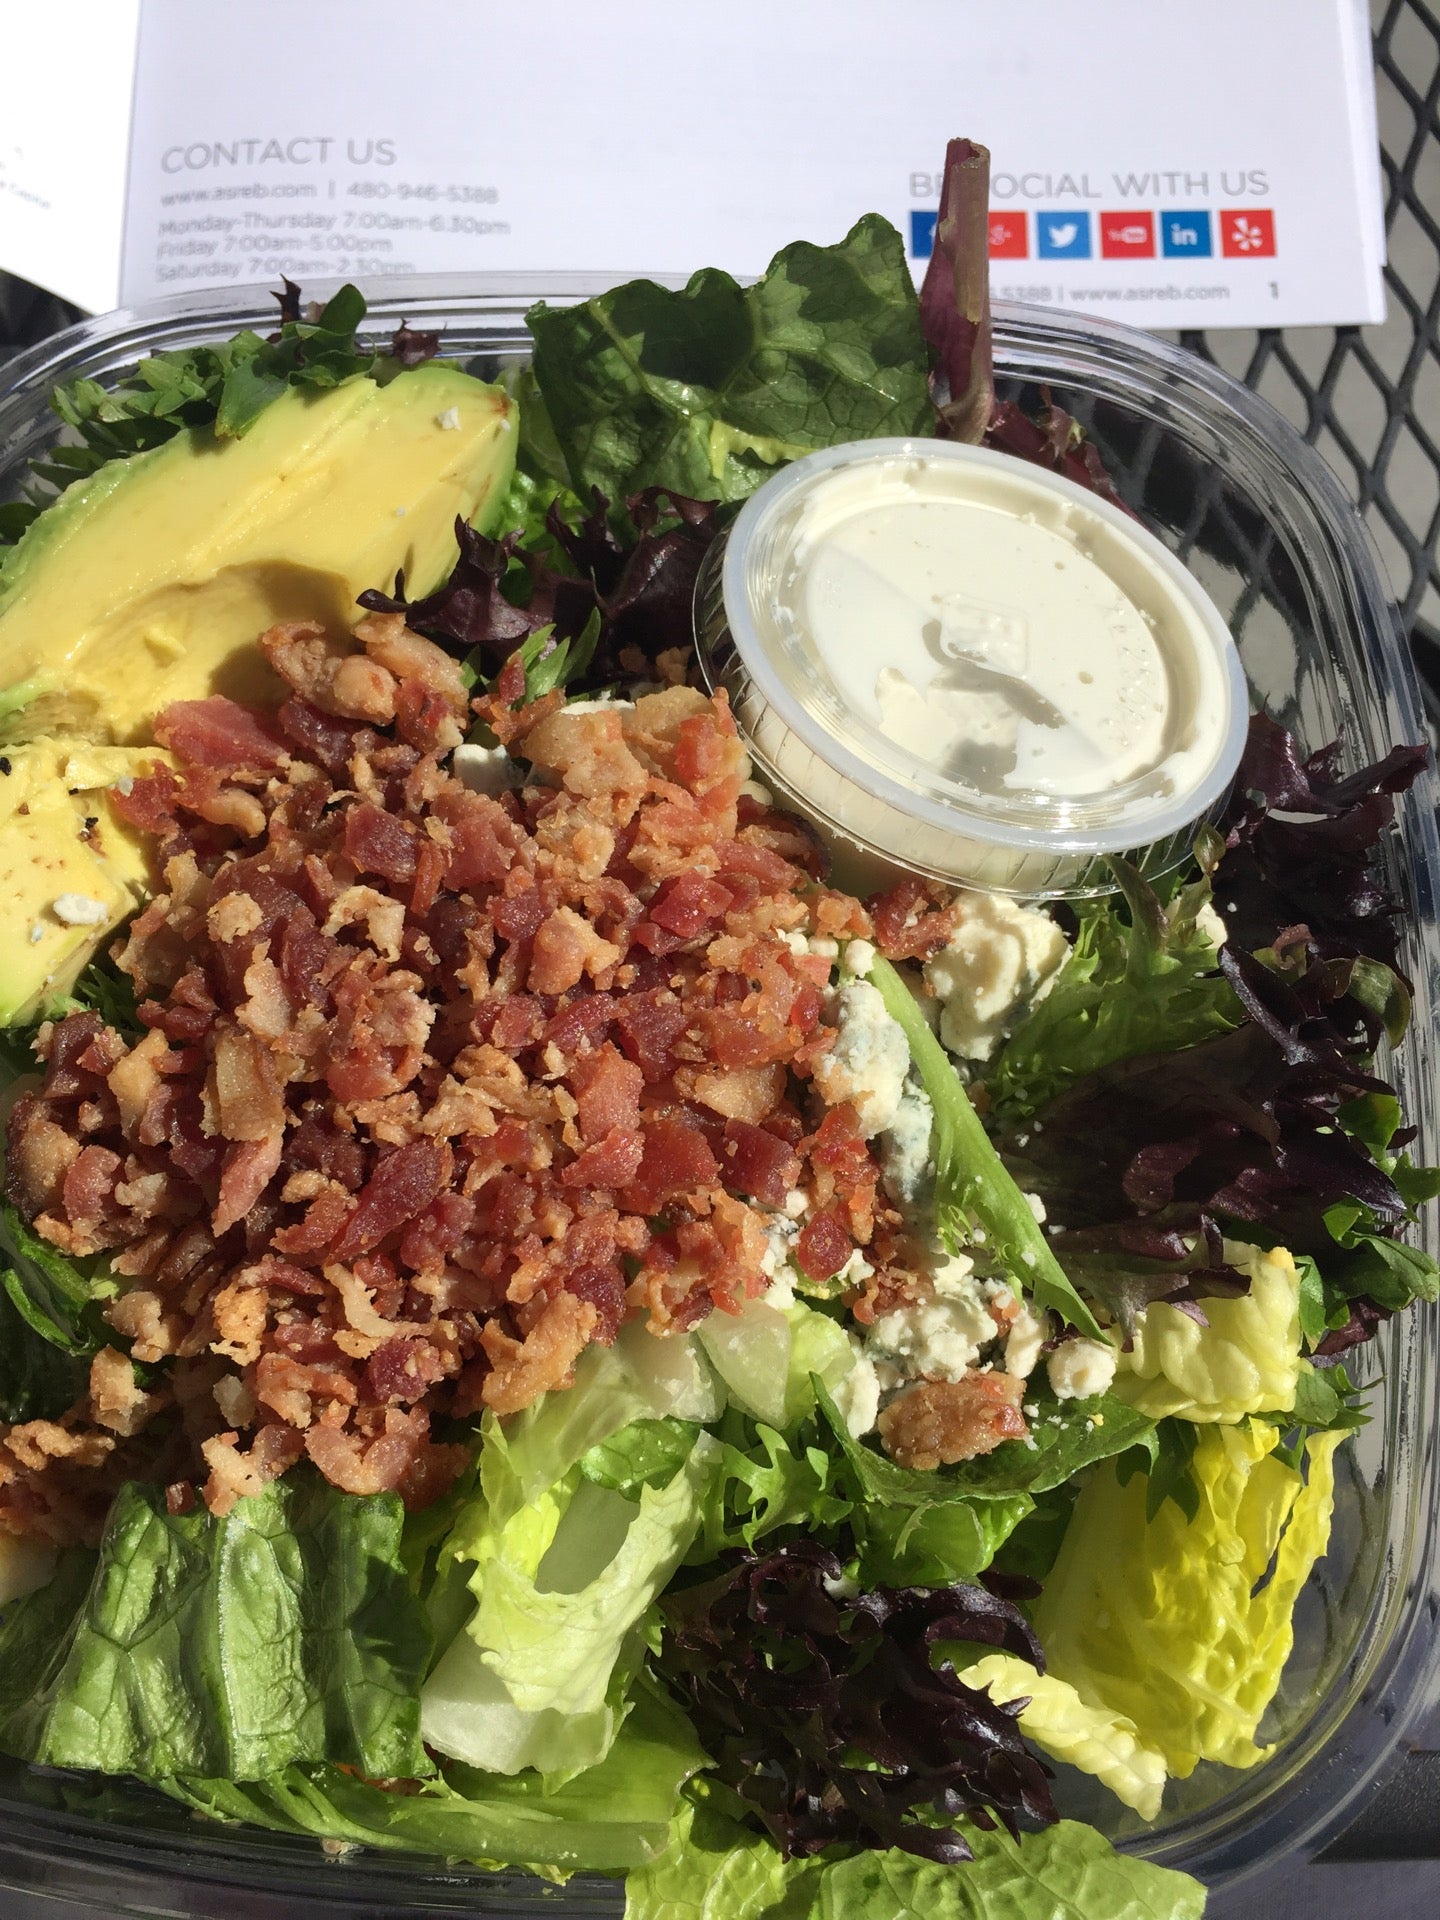 Gilbert-based Salad and Go replaces 4 of its 8 â€˜coreâ€™ salads